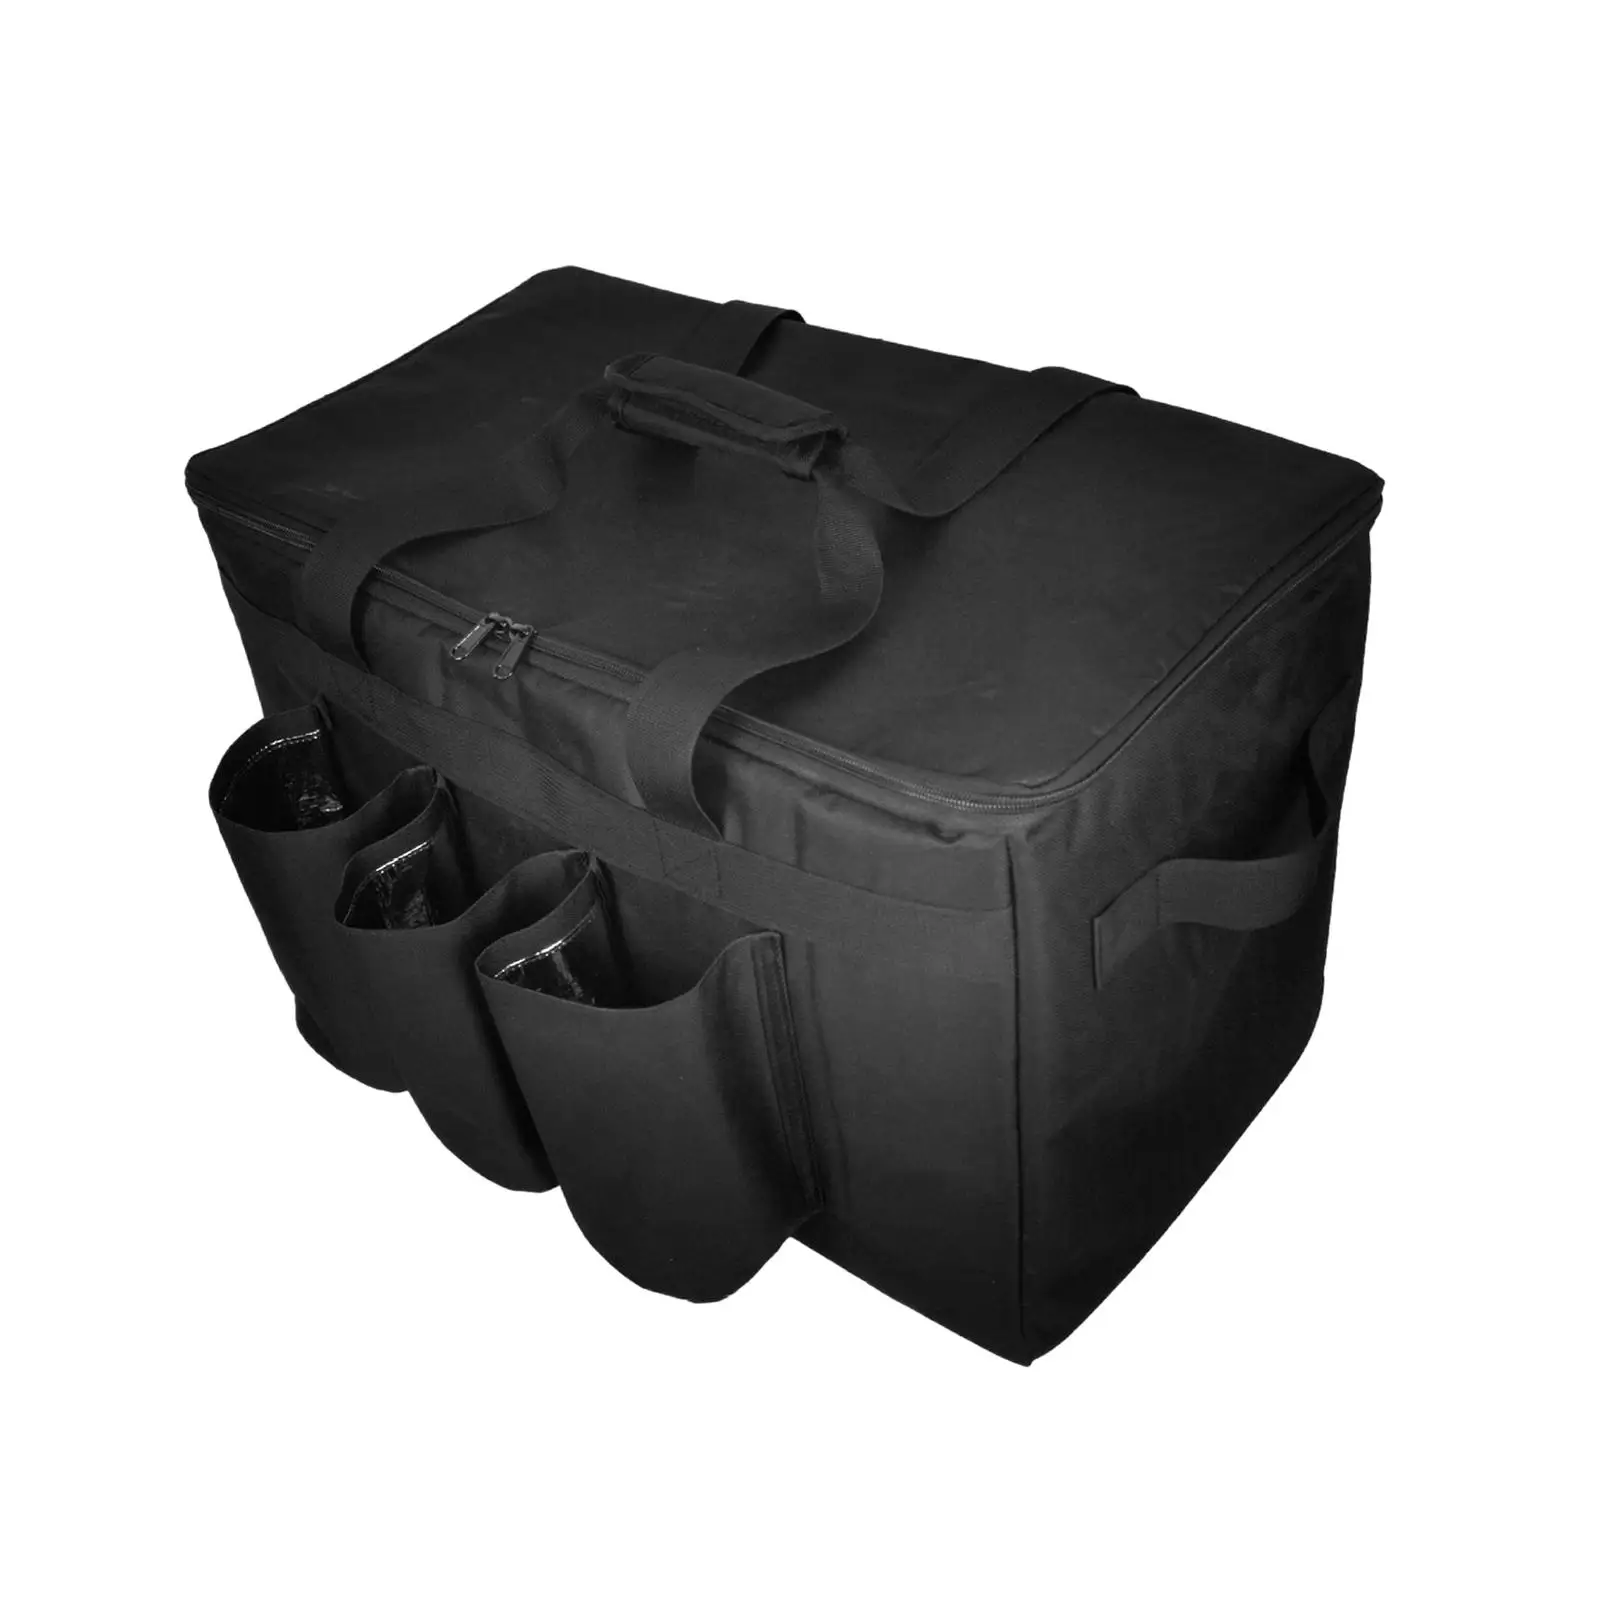 Insulated Food Delivery Bag Thickened Lightweight Portable Thermal Food Delivery Bag for Home Catering Shopping Camping Personal